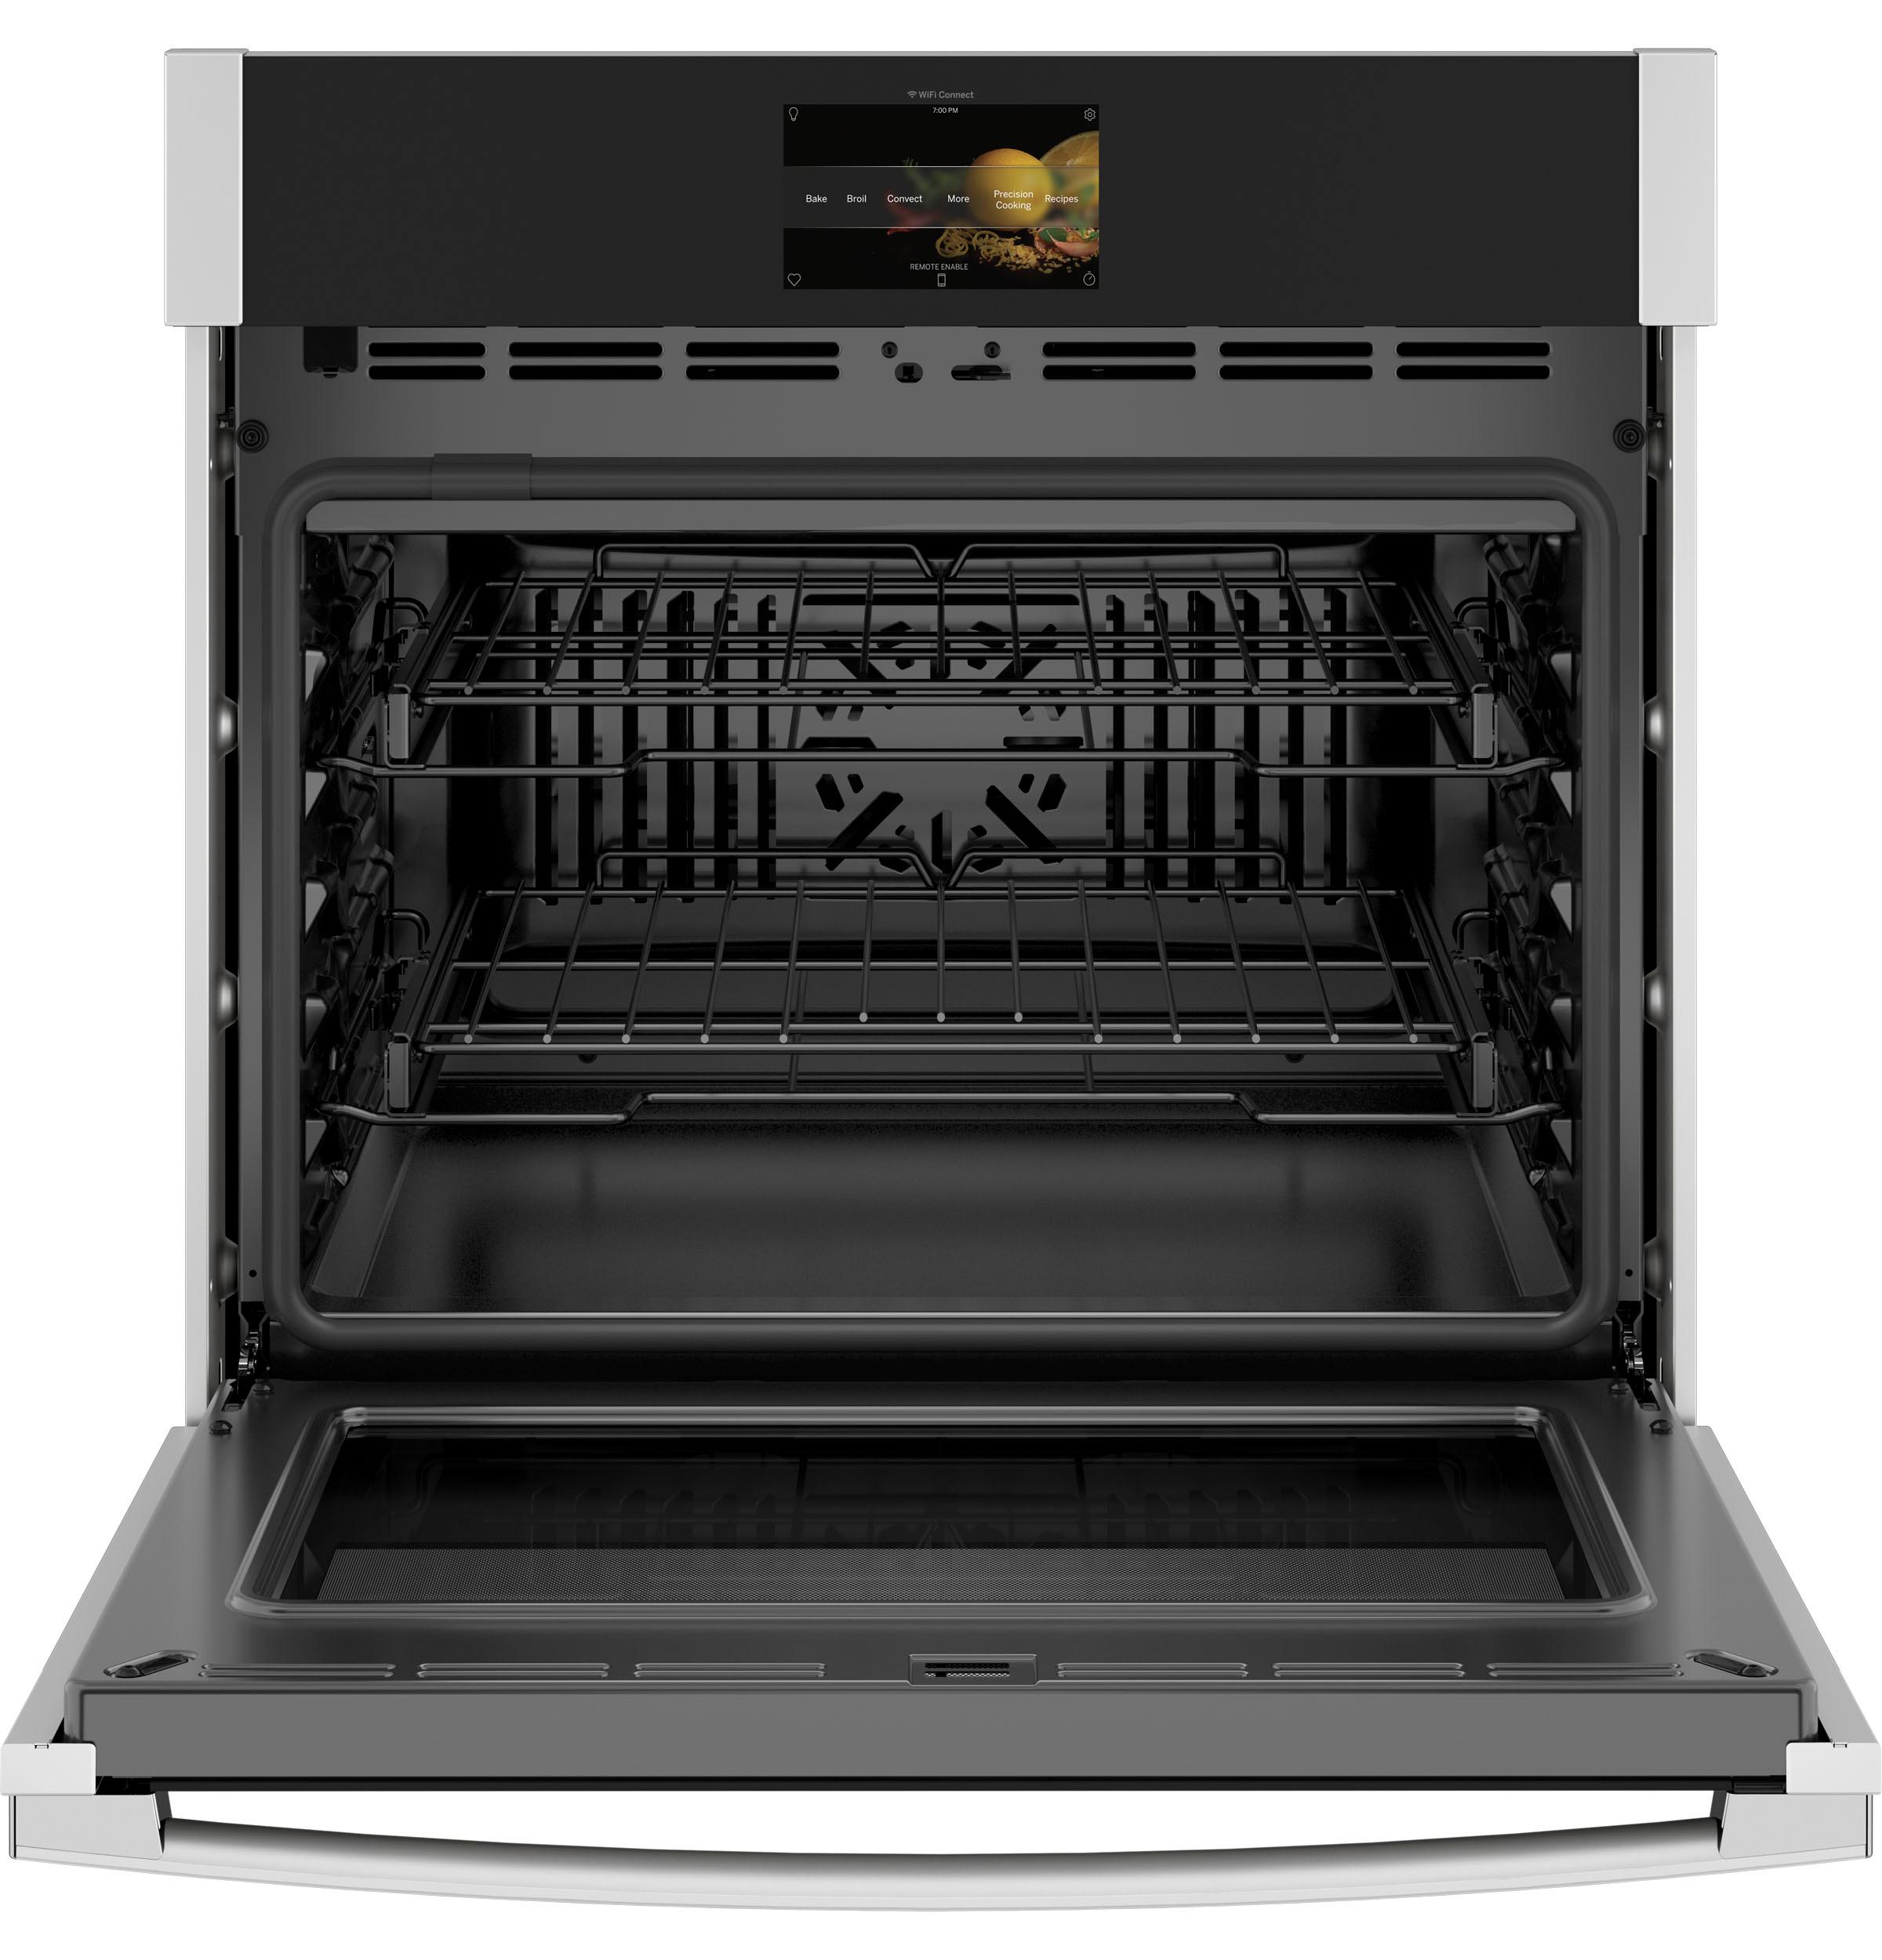 GE Profile™ 30" Smart Built-In Convection Single Wall Oven with In-Oven Camera and No Preheat Air Fry